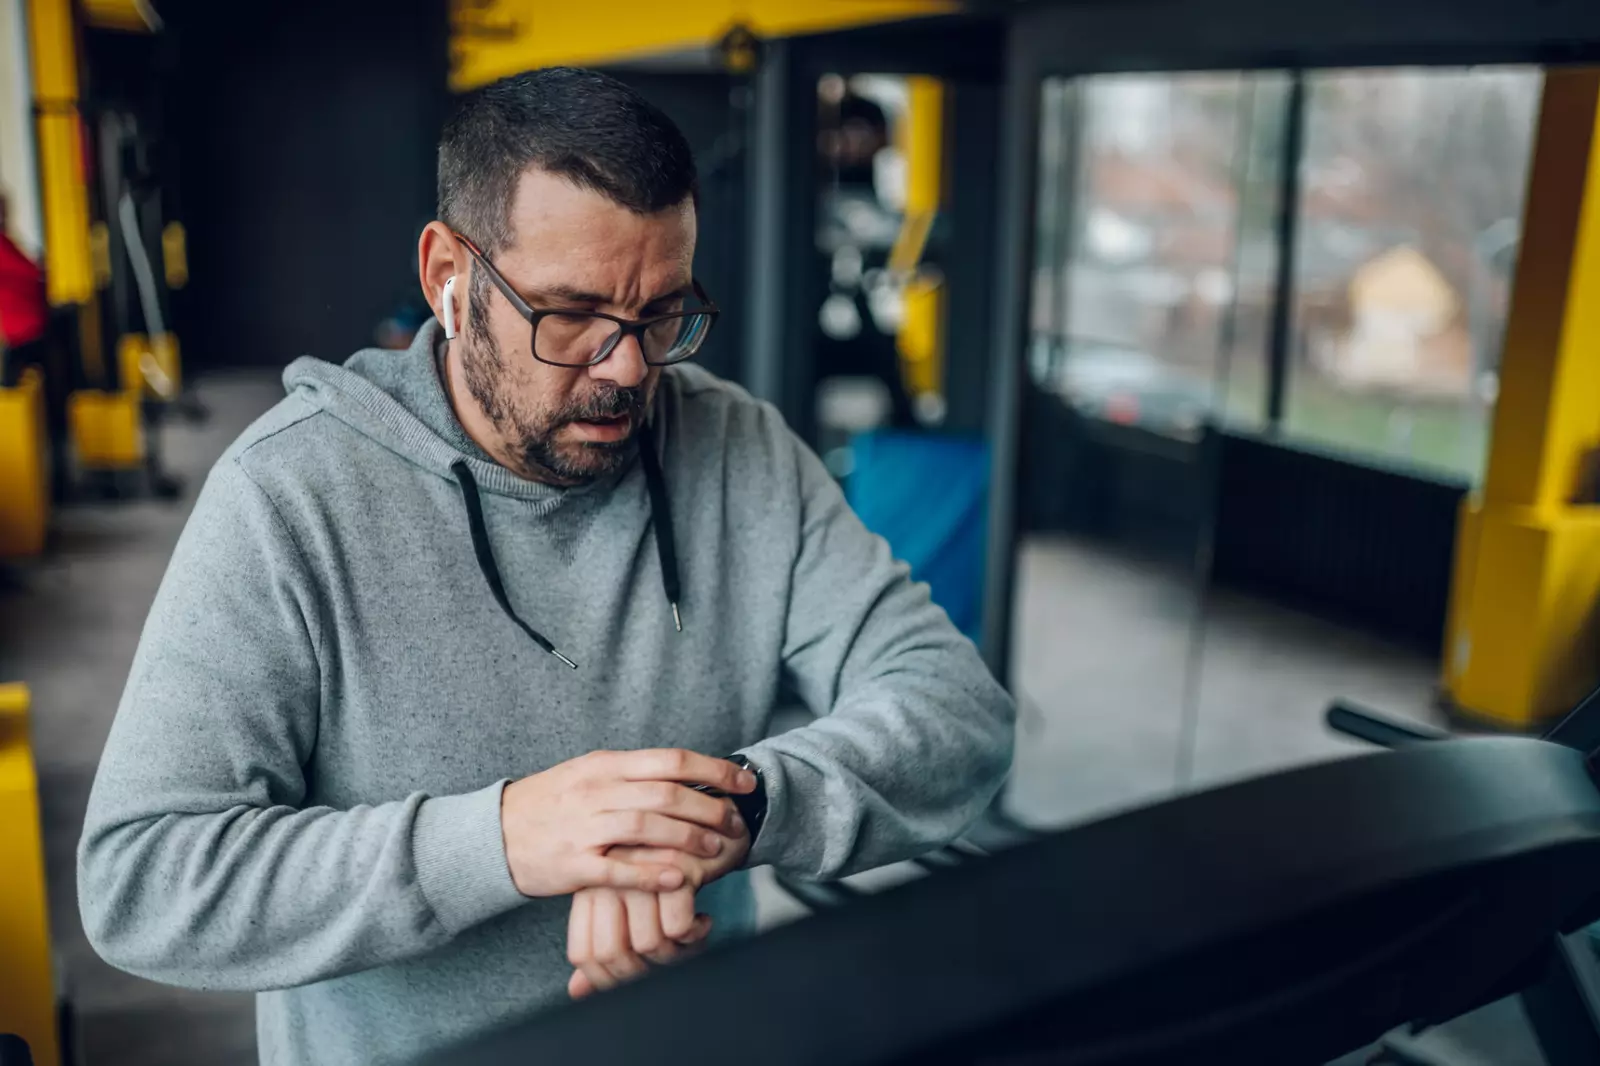 Man on a treadmill checking his watch